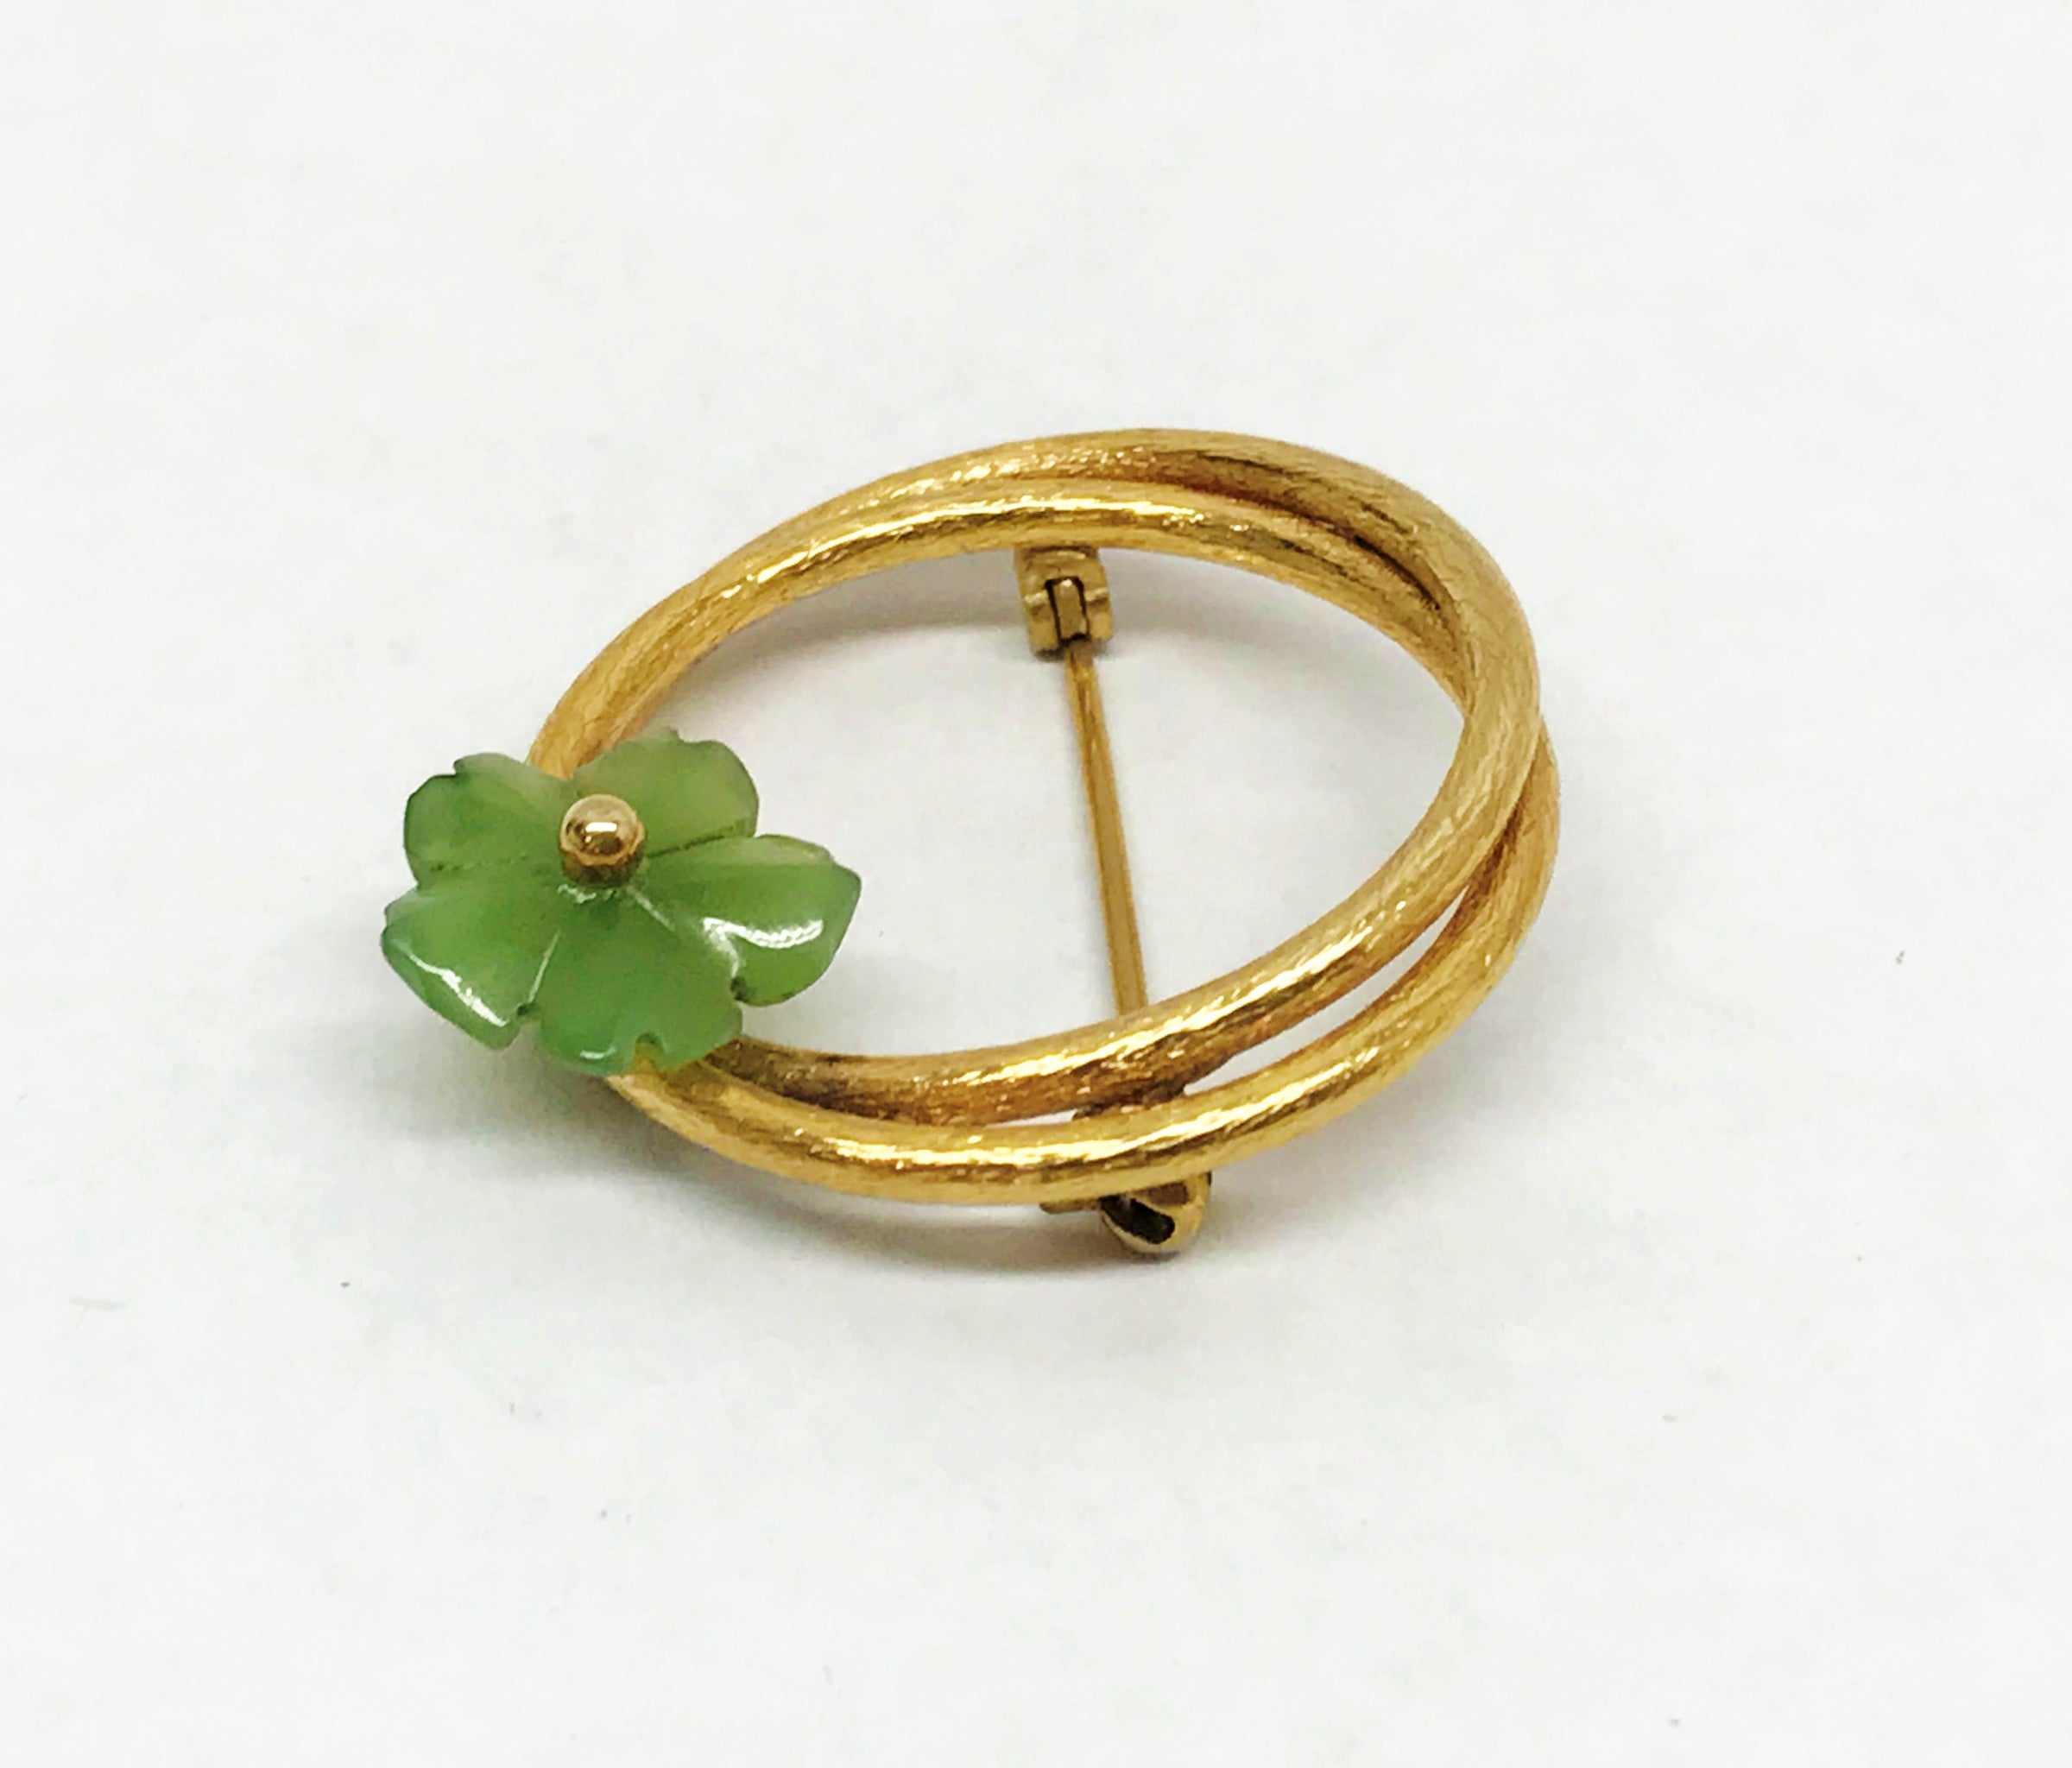 www.hersandhistreasures.com/products/carl-art-signed-1-20-12k-gf-gold-filled-round-brooch-pin-with-jade-flower